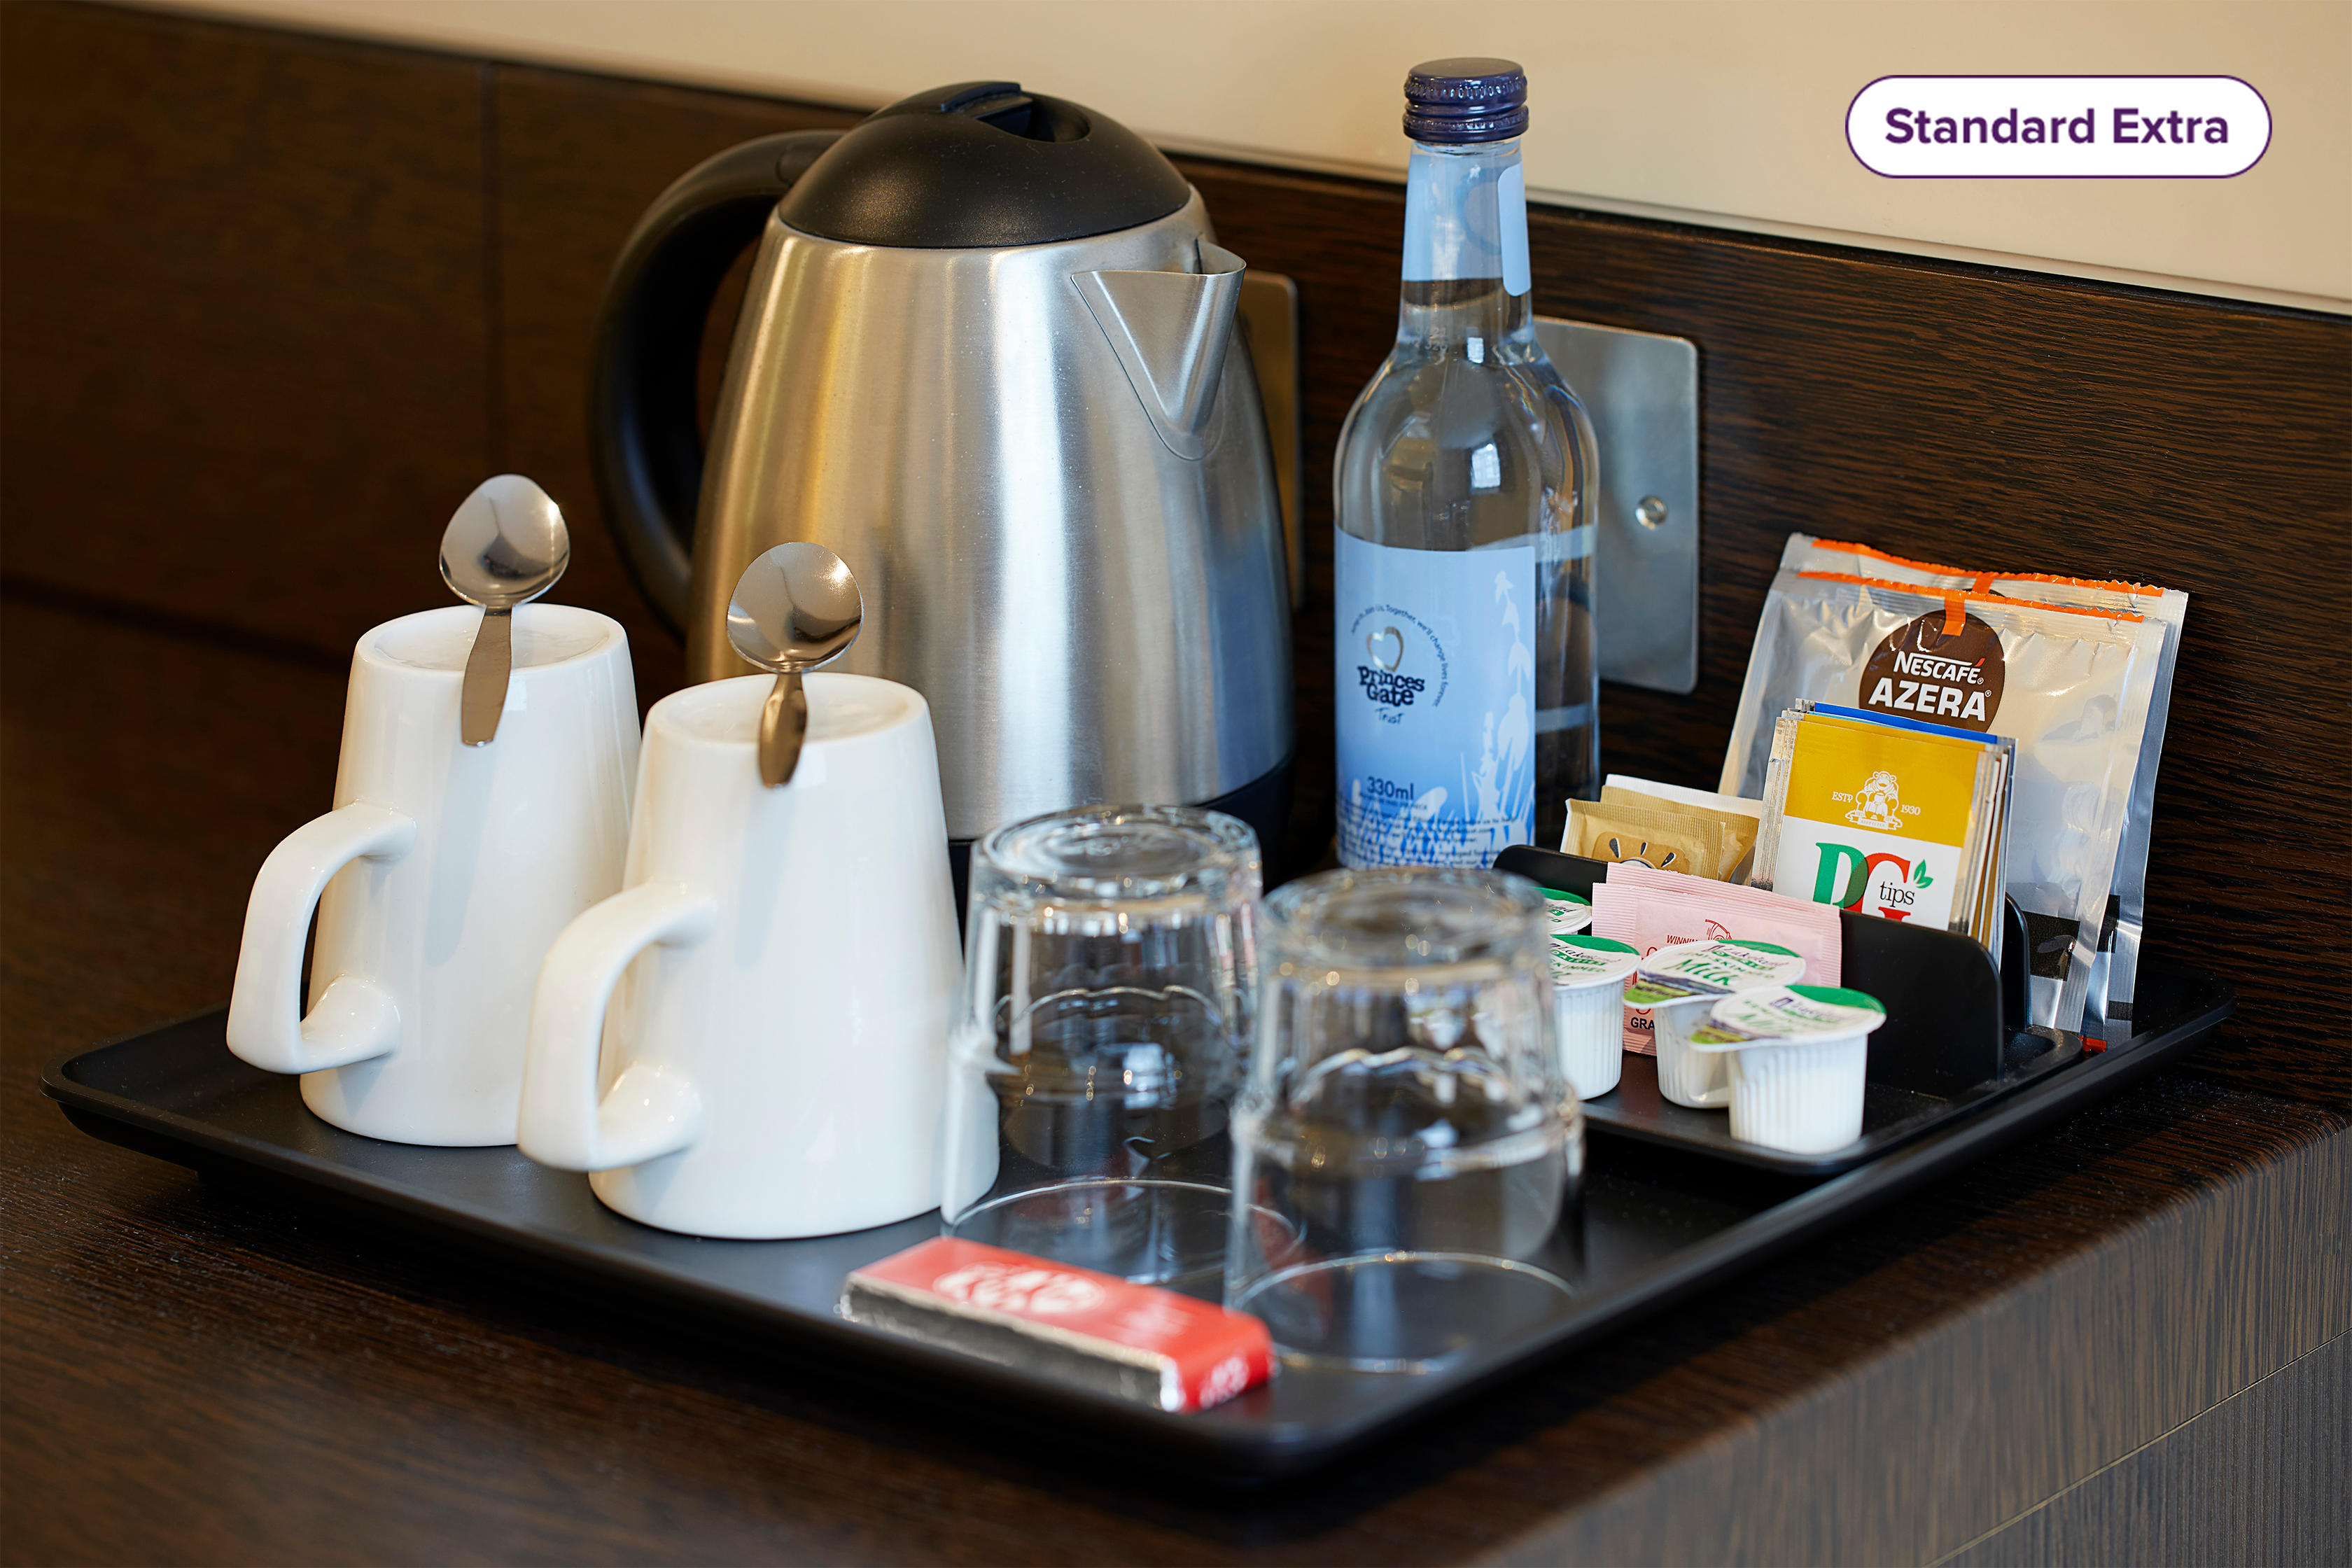 Standard Extra Bedroom with tea and coffee making facilities Premier Inn Liverpool City Centre (Moorfields) hotel Liverpool 03333 211233